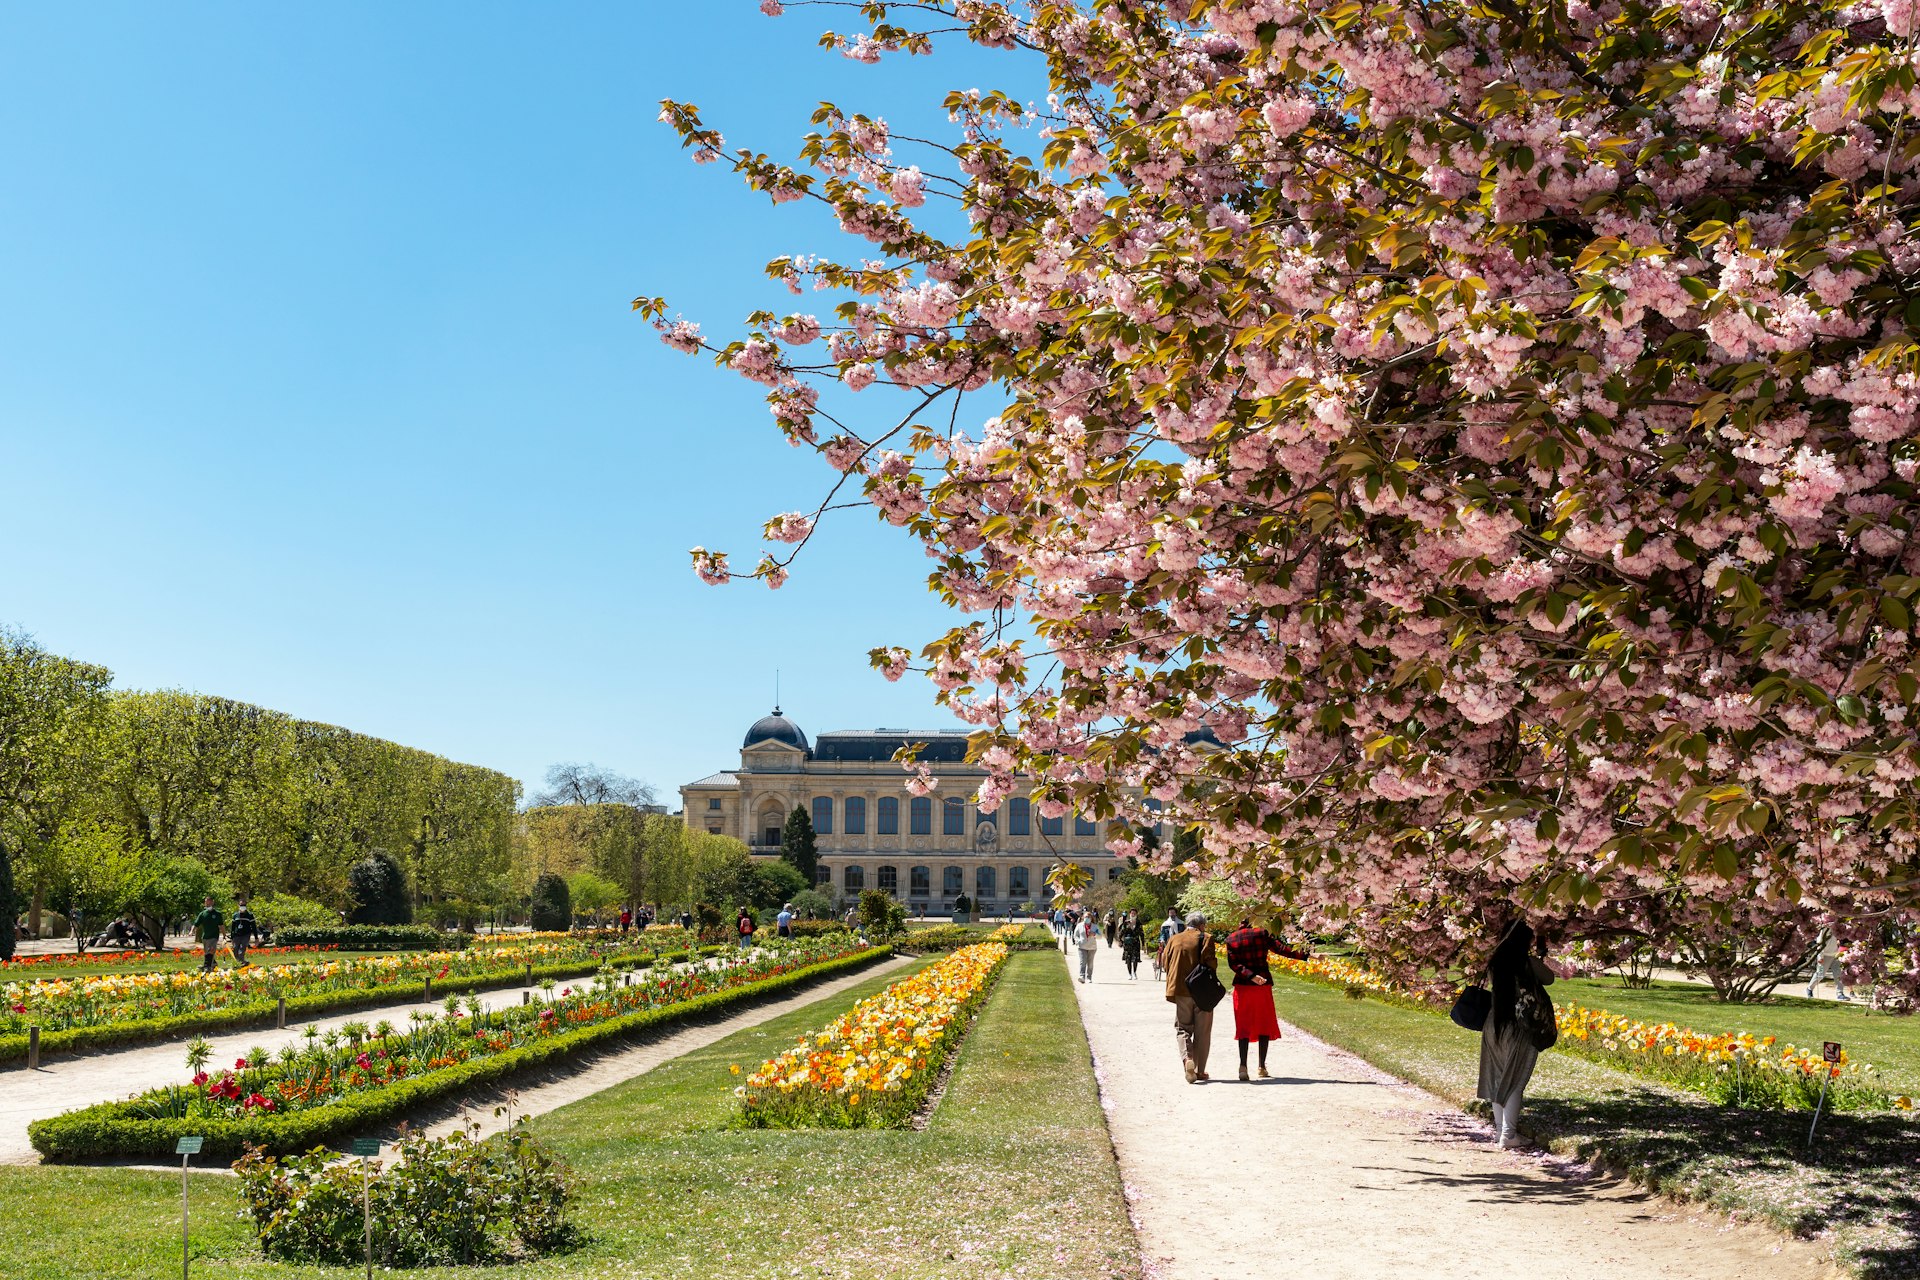 Many people stroll along pathways lined with cherry blossom trees in bloom at the Jardin des Plantes in springtime 